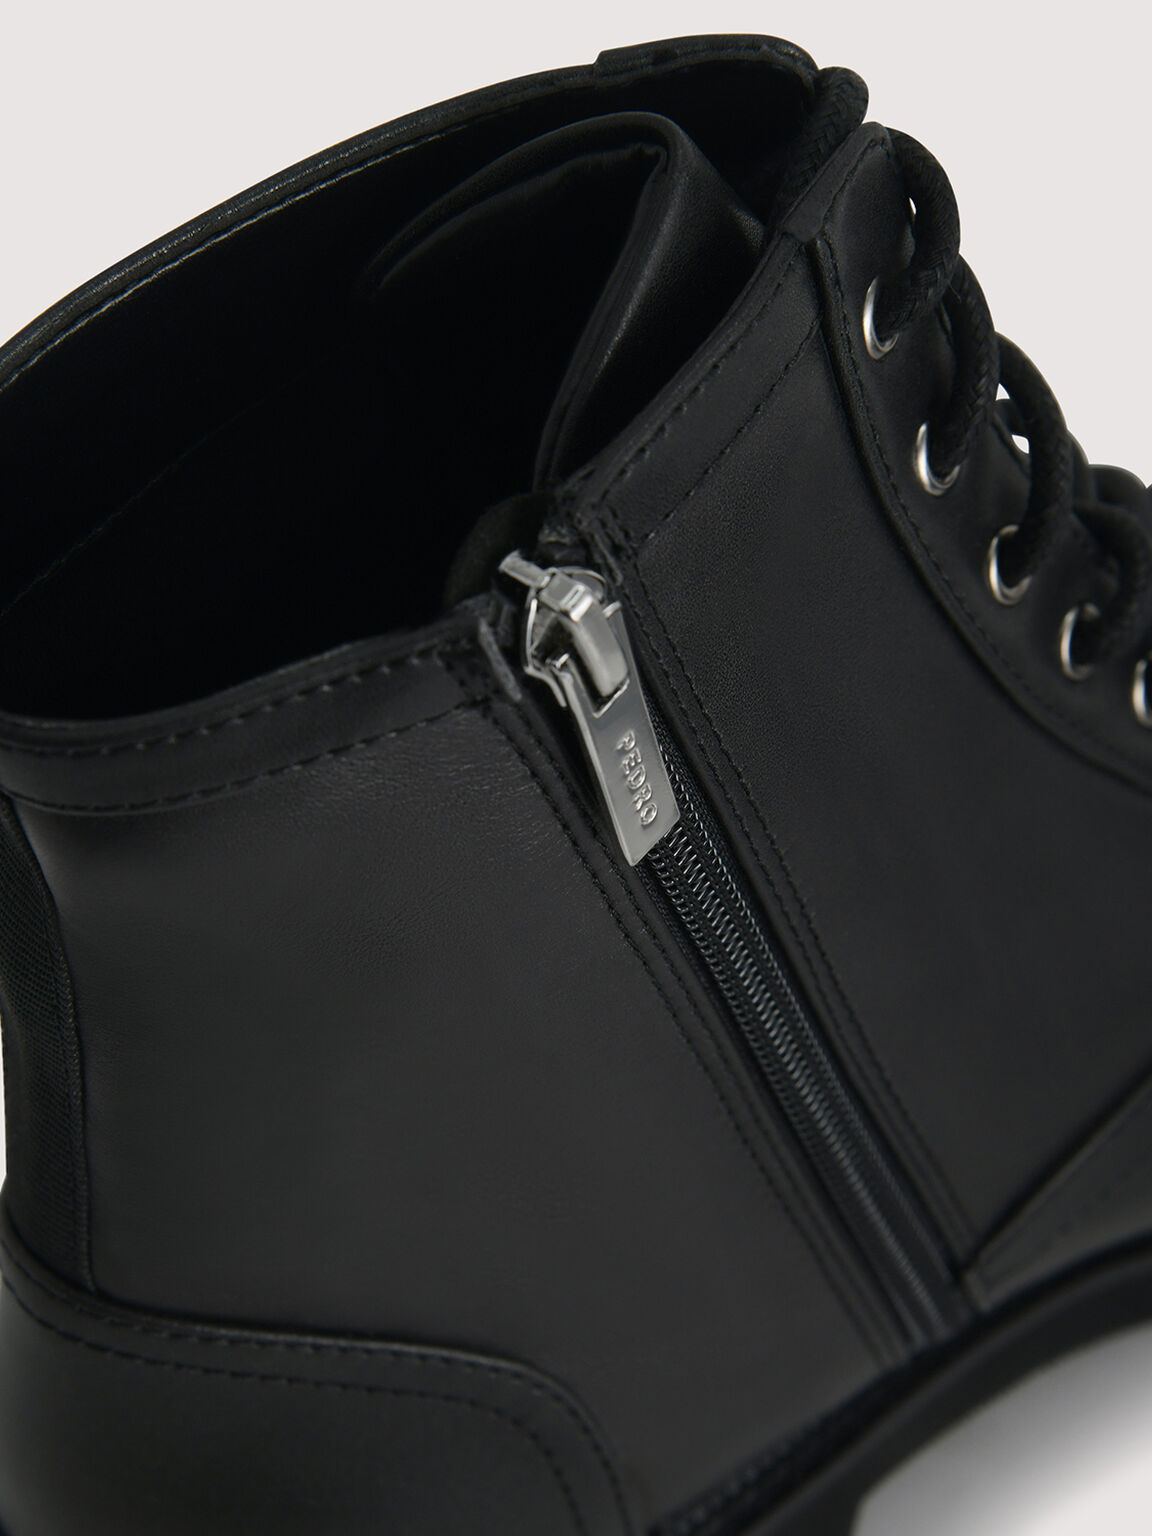 Leather Lace Up Boots, Black2, hi-res